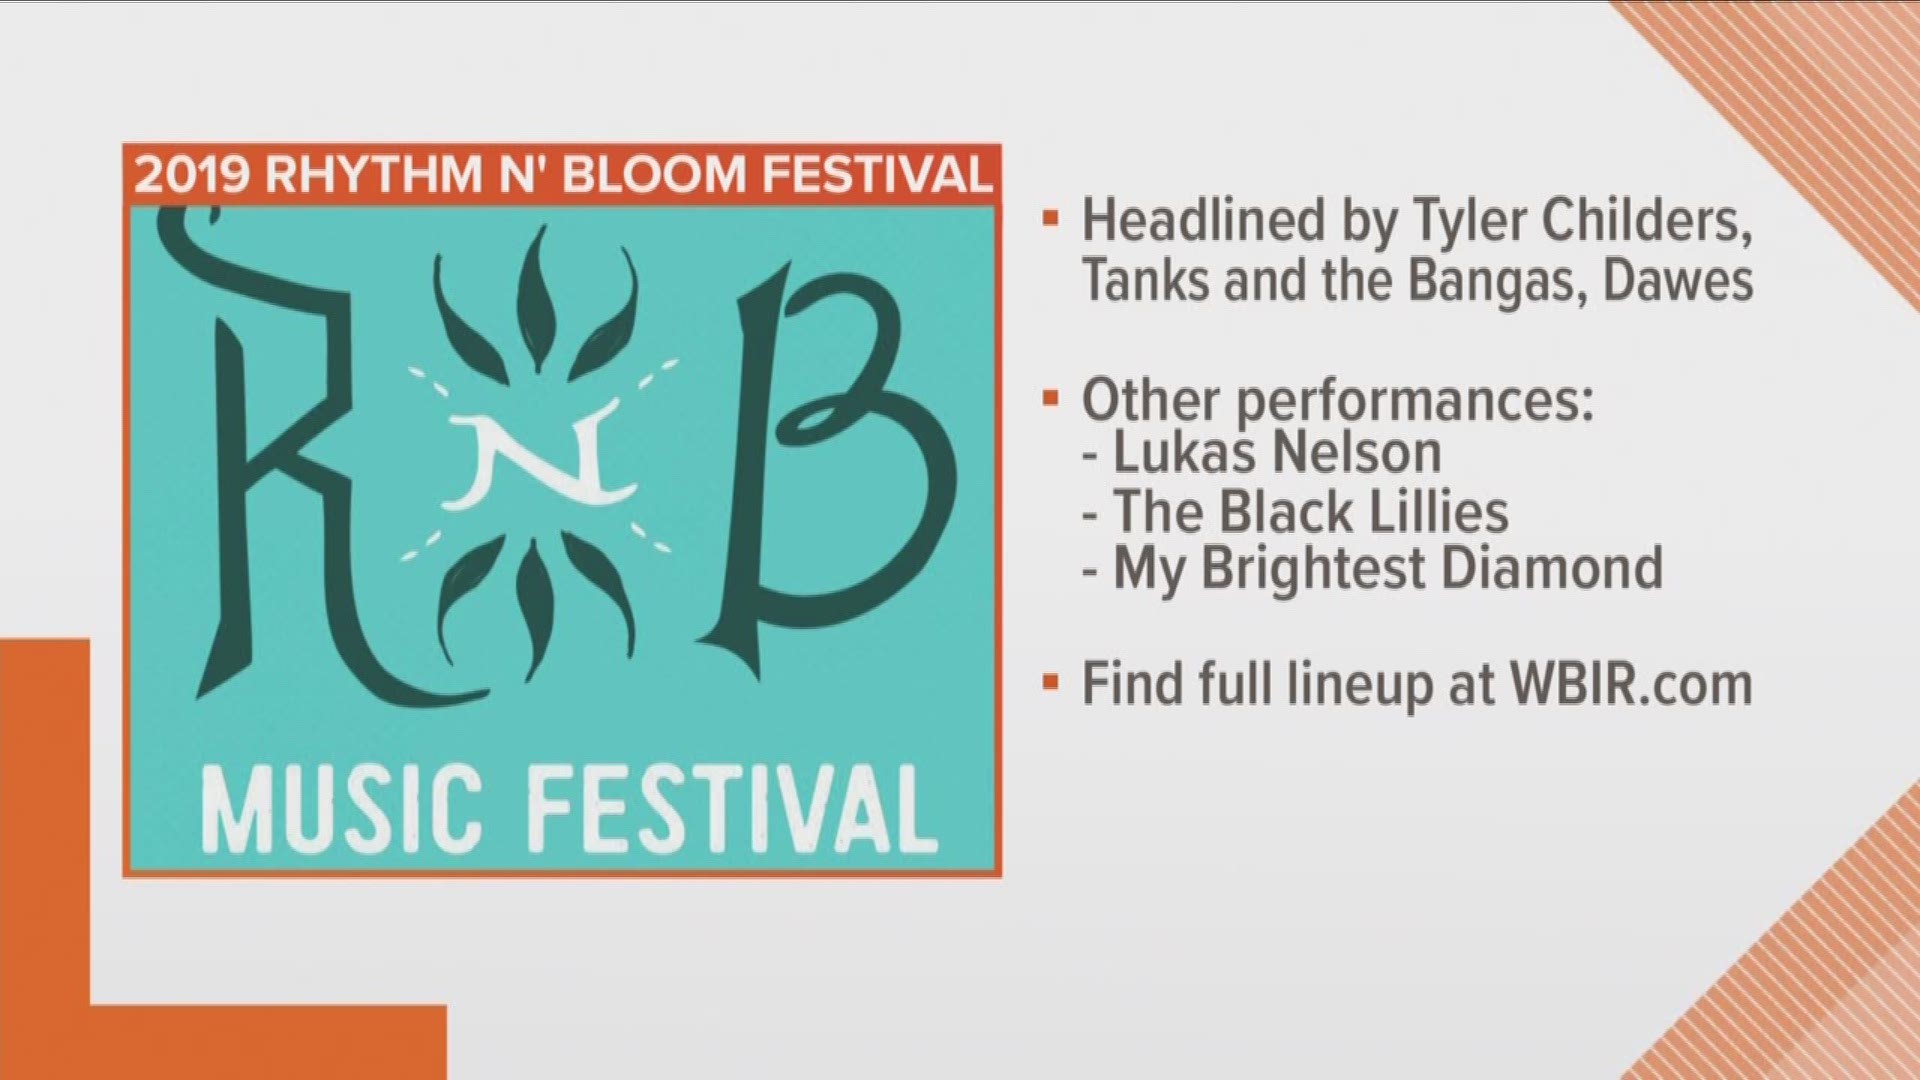 The Dogwood Arts Rhythm N' Blooms music festival is coming this spring and today we are learning the full lineup!